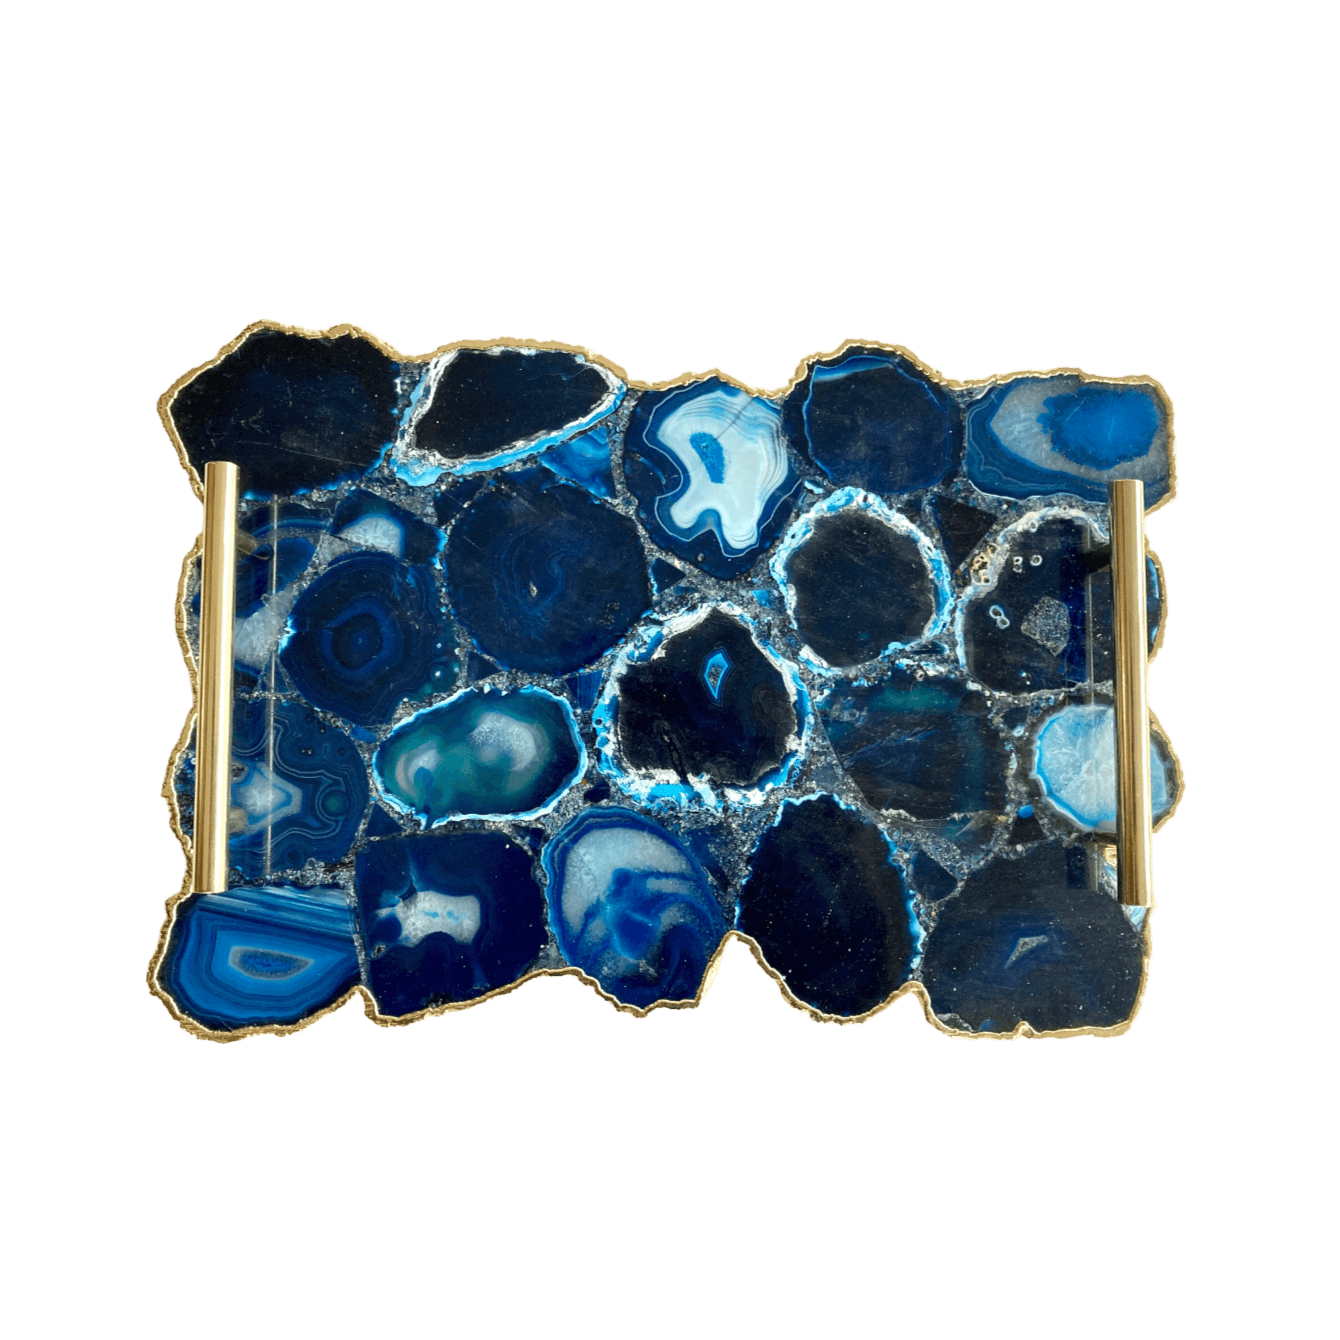 Large Blue Agate Serving Tray With Brass Handles - MAIA HOMES